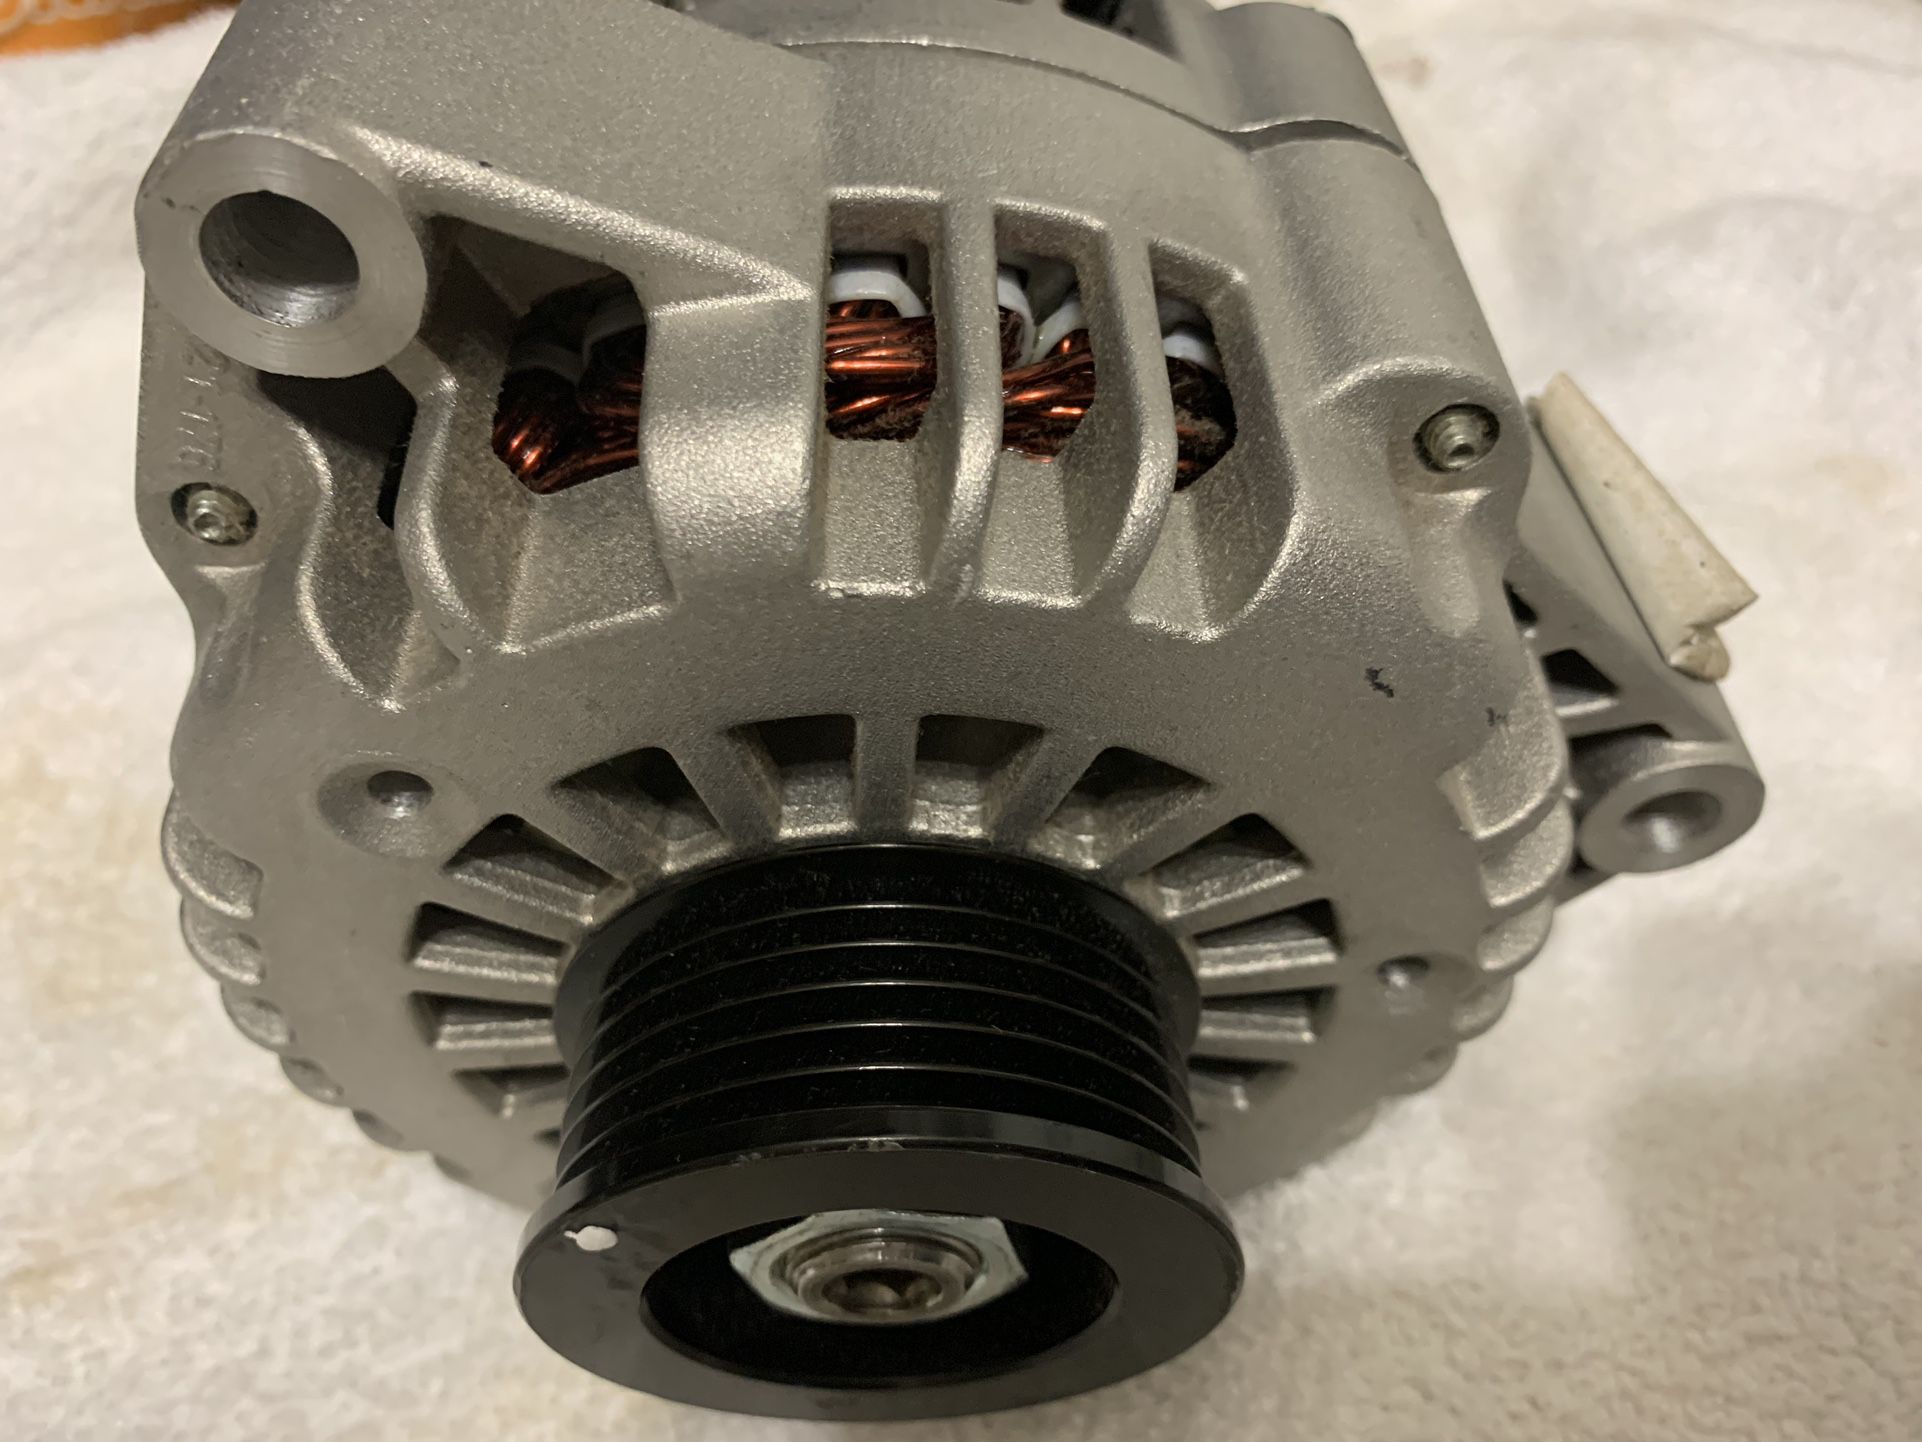 Replacement for CARQUEST 8247AV ALTERNATOR Chevrolet and GMC Truck Applications